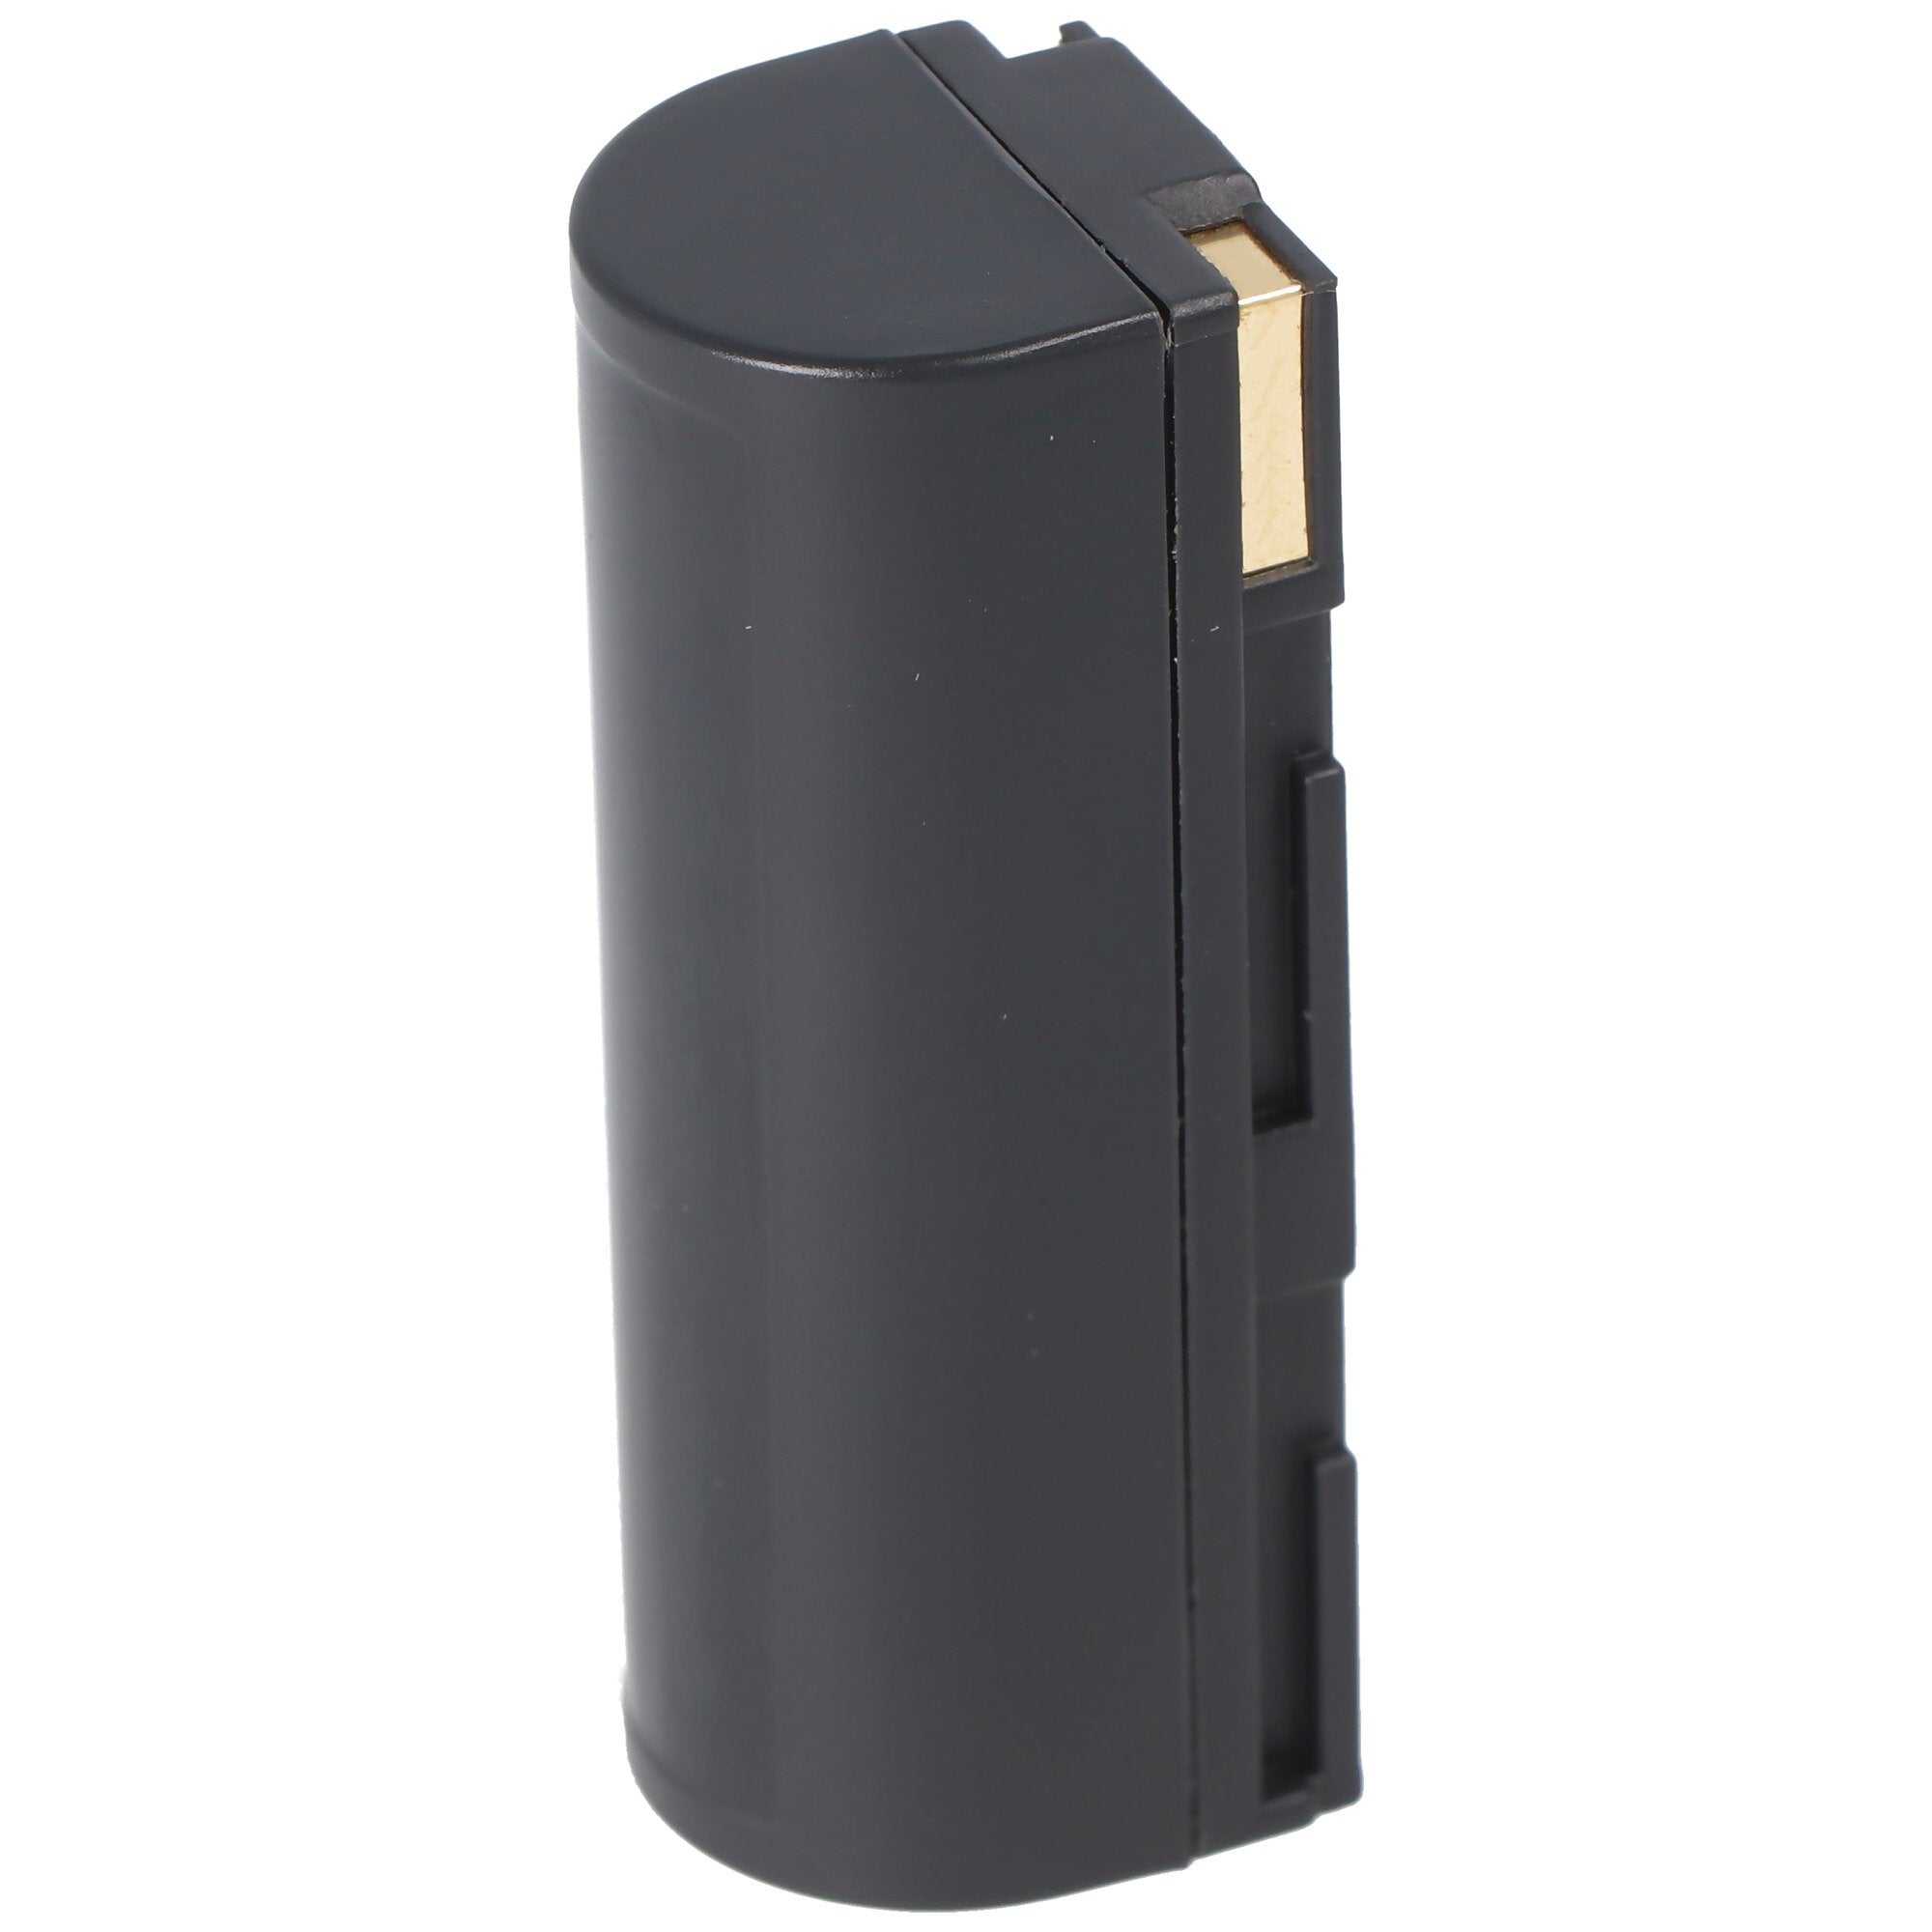 AccuCell battery suitable for Fuji NP-80, FinPix 1700z, 6900 Zoom